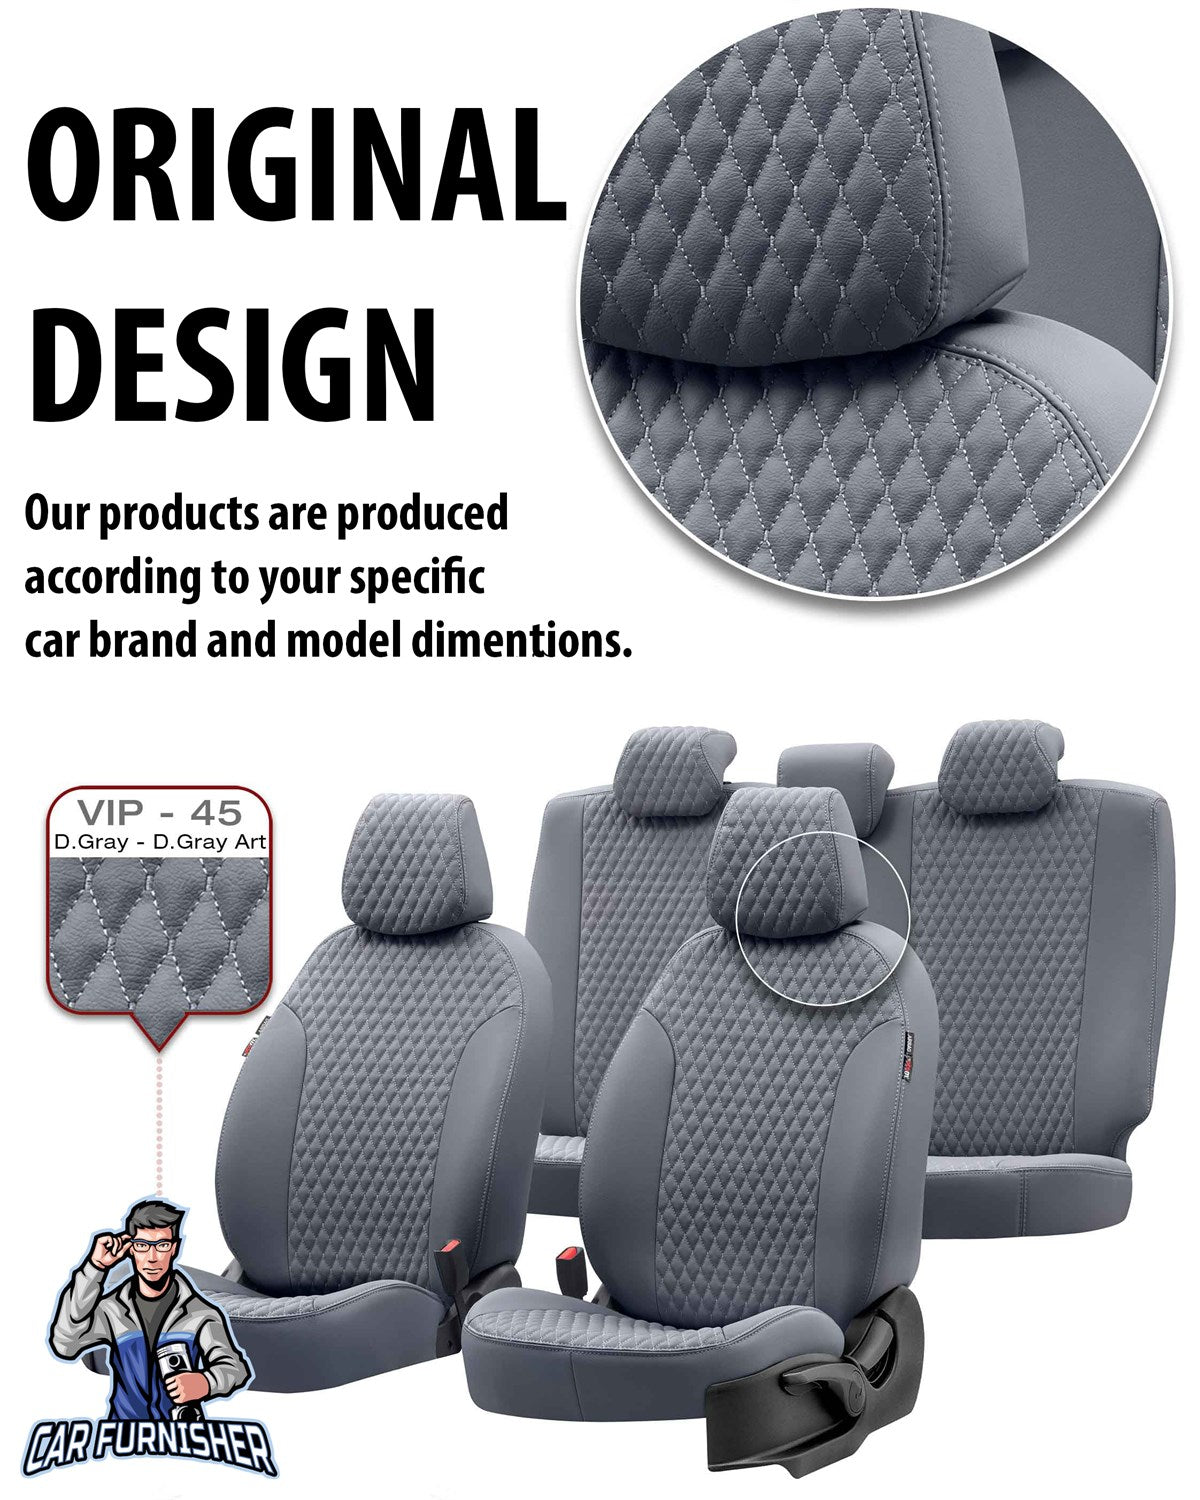 Nissan Pathfinder Seat Cover Amsterdam Leather Design Smoked Black Leather